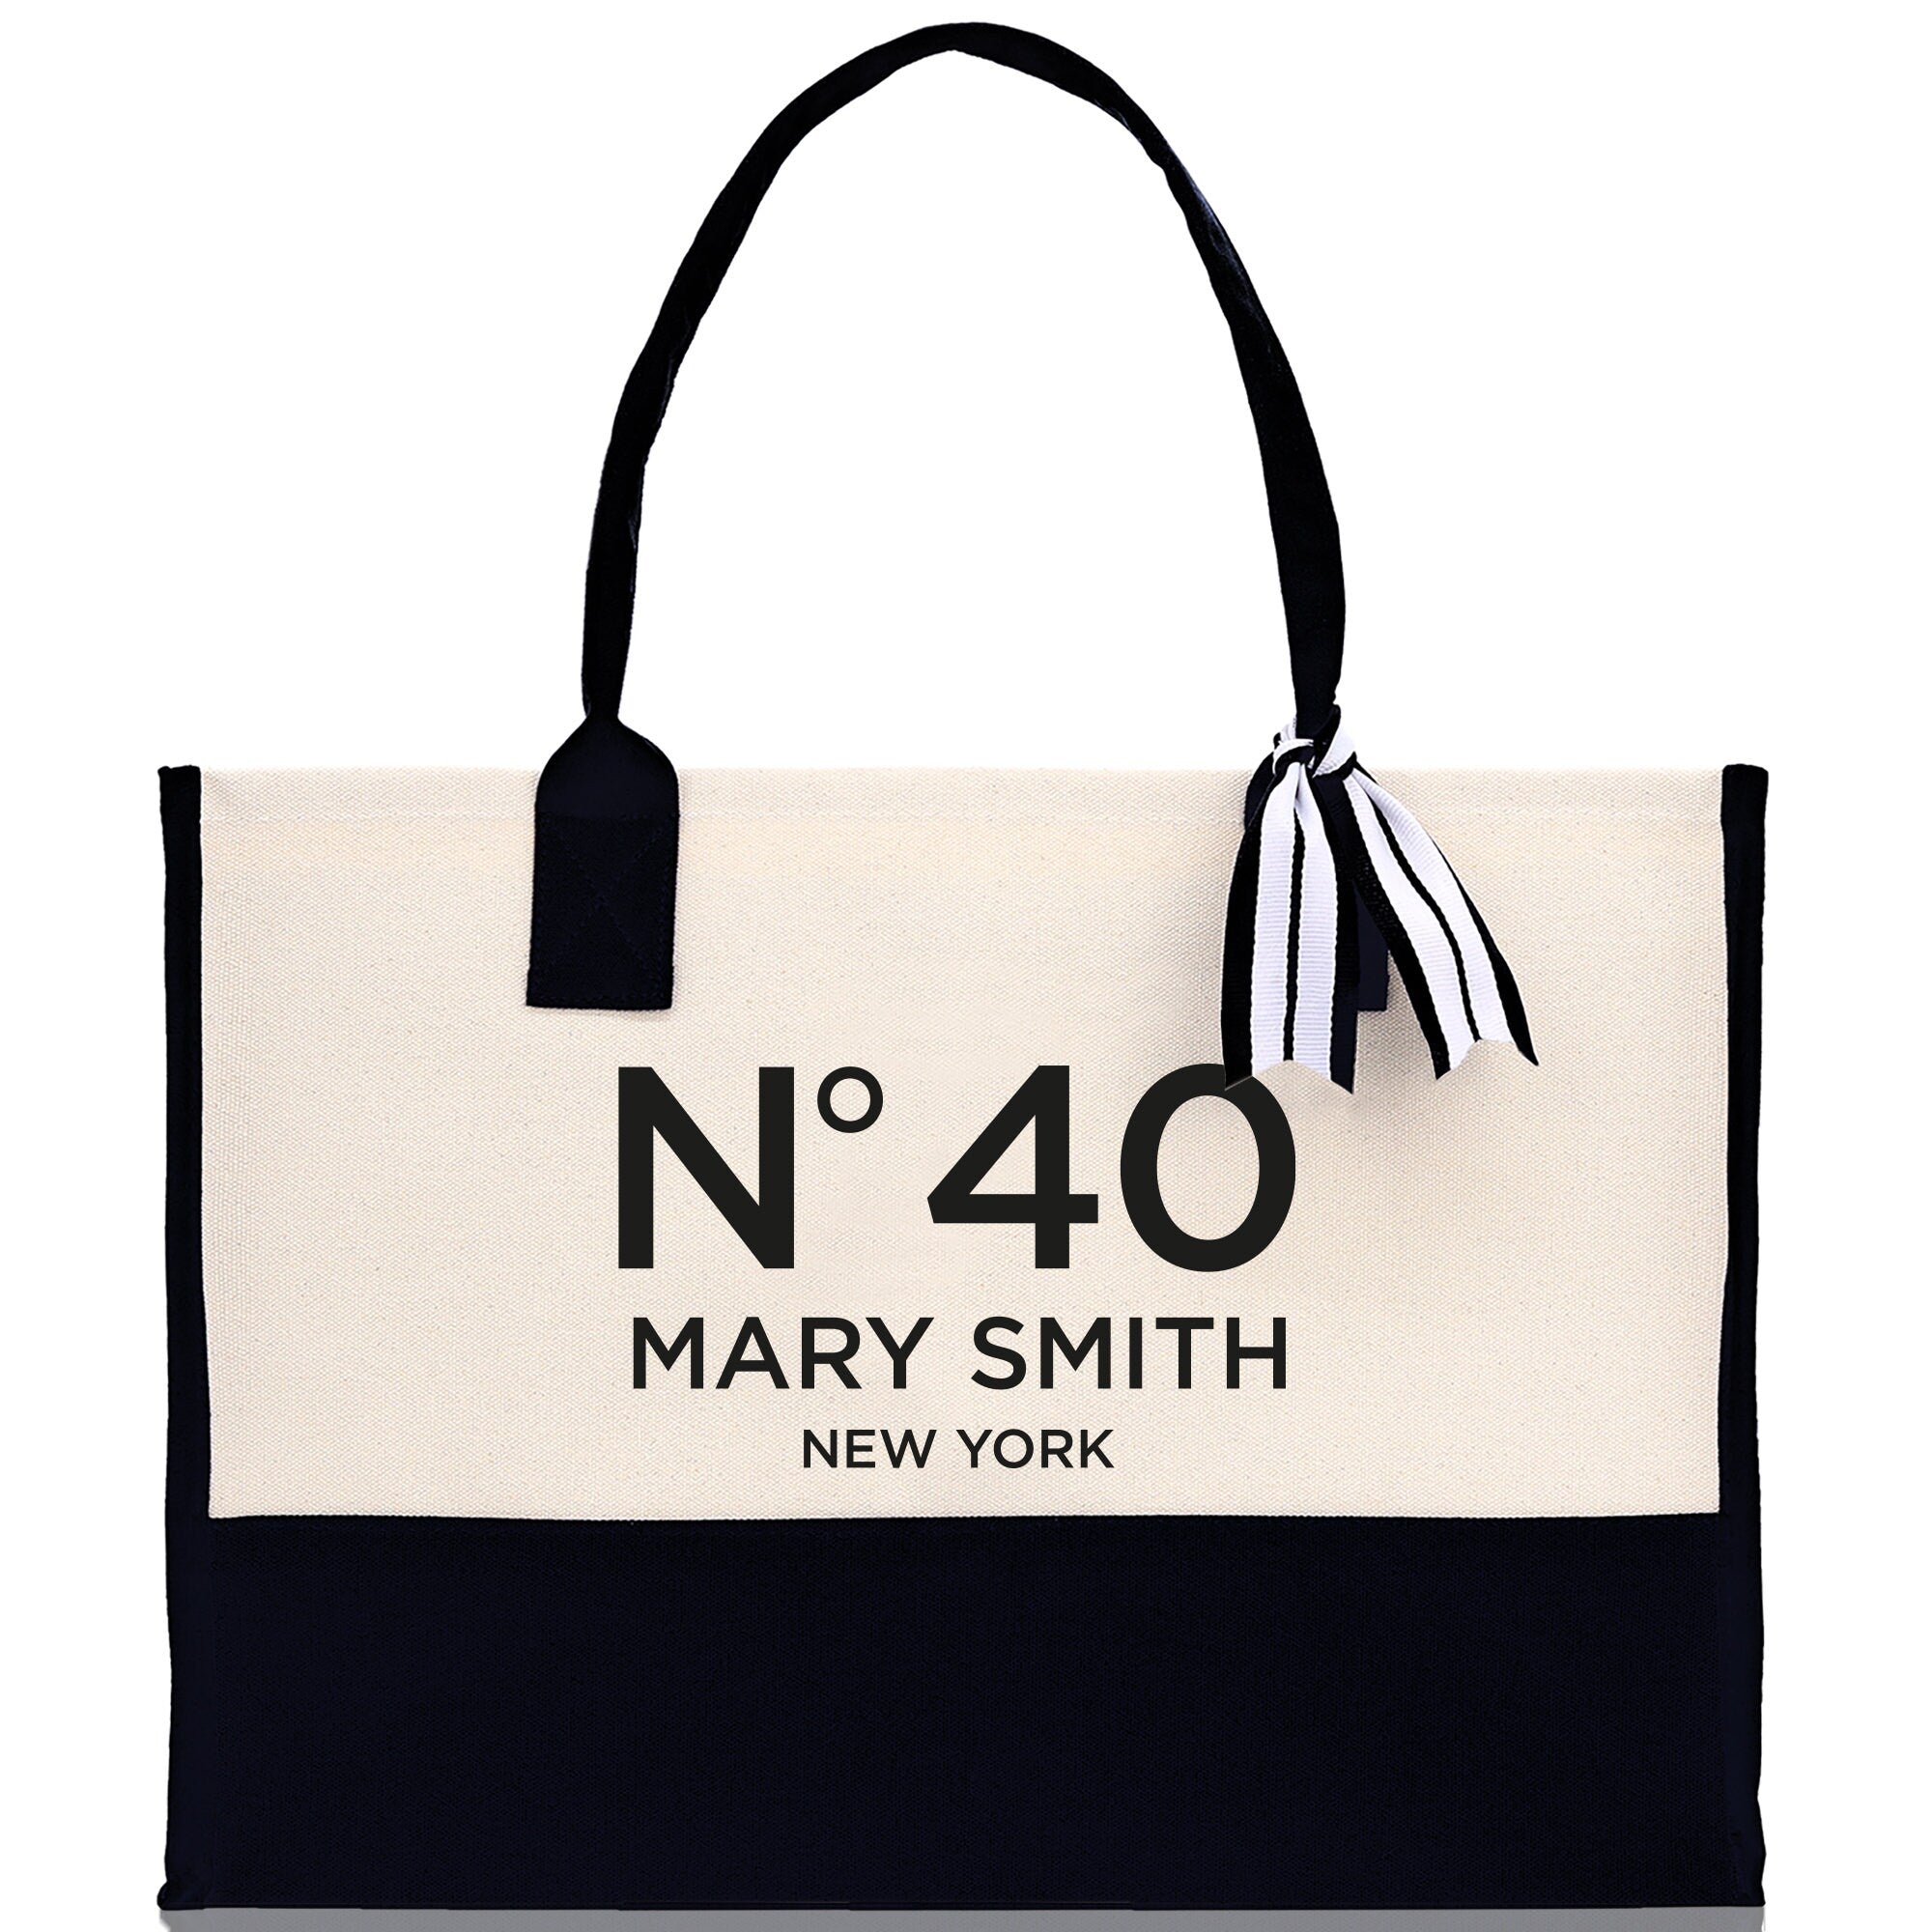 Birthday Celebration Personalized Gift Canvas Tote Bag with Name and State 40th 50th Birthday Gift Tote Bag for Her Custom Birthday Gift